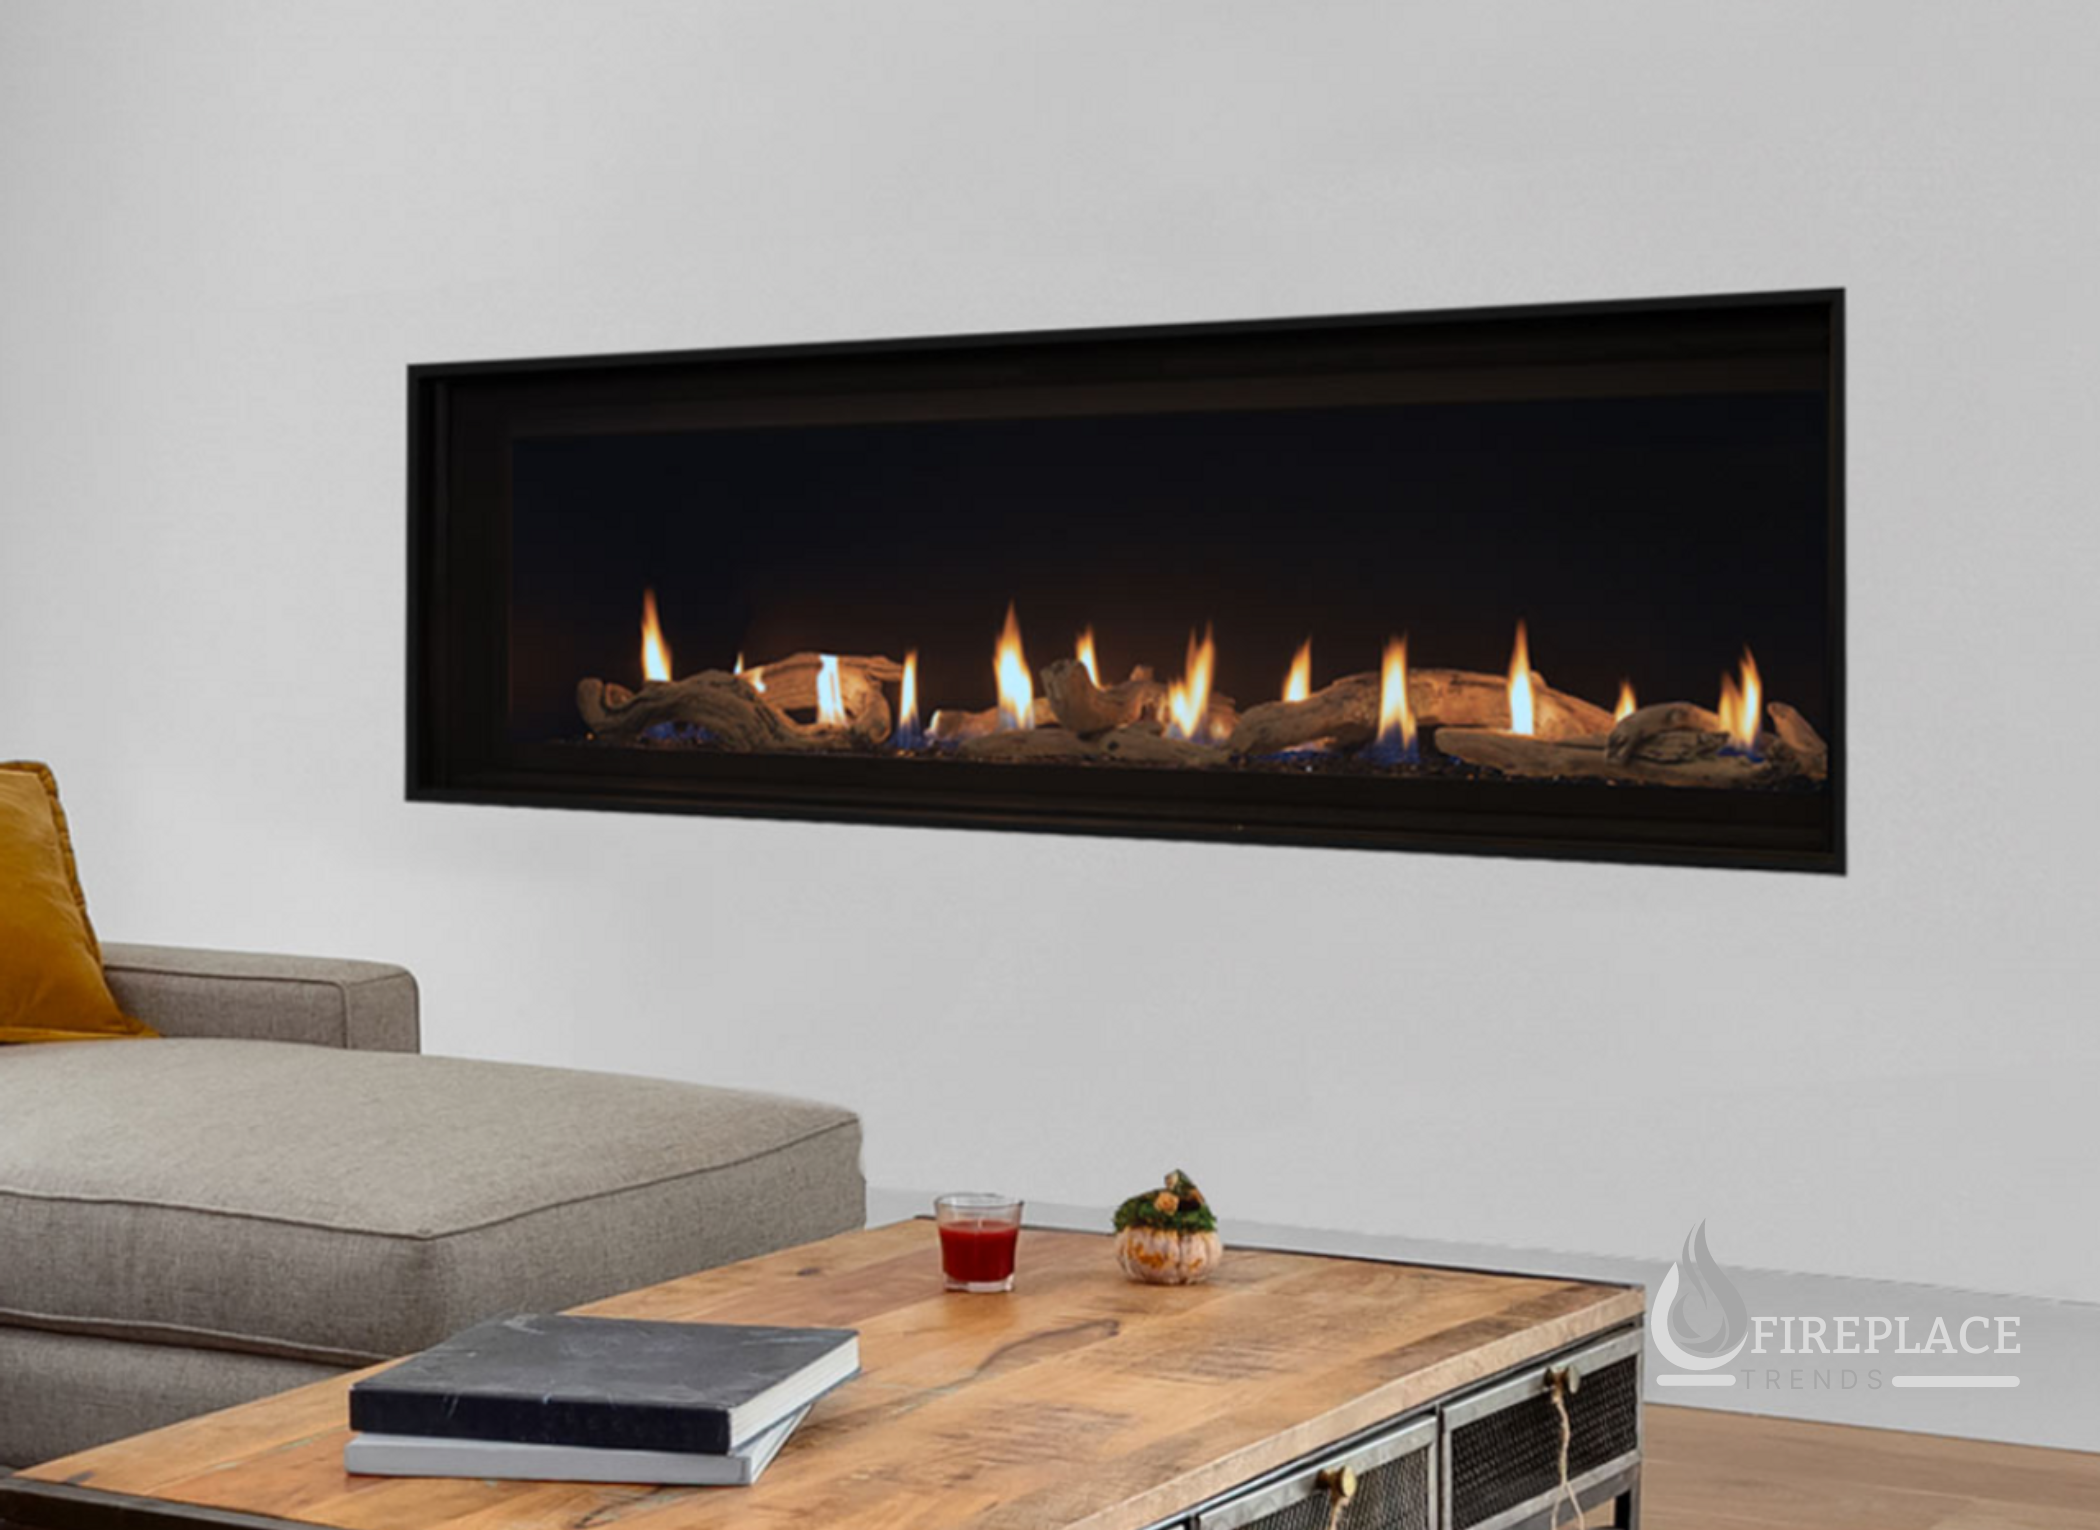 Superior - 84" - Electronic Ignition Direct Vent Linear Gas Fireplace - DRL 4000 Series